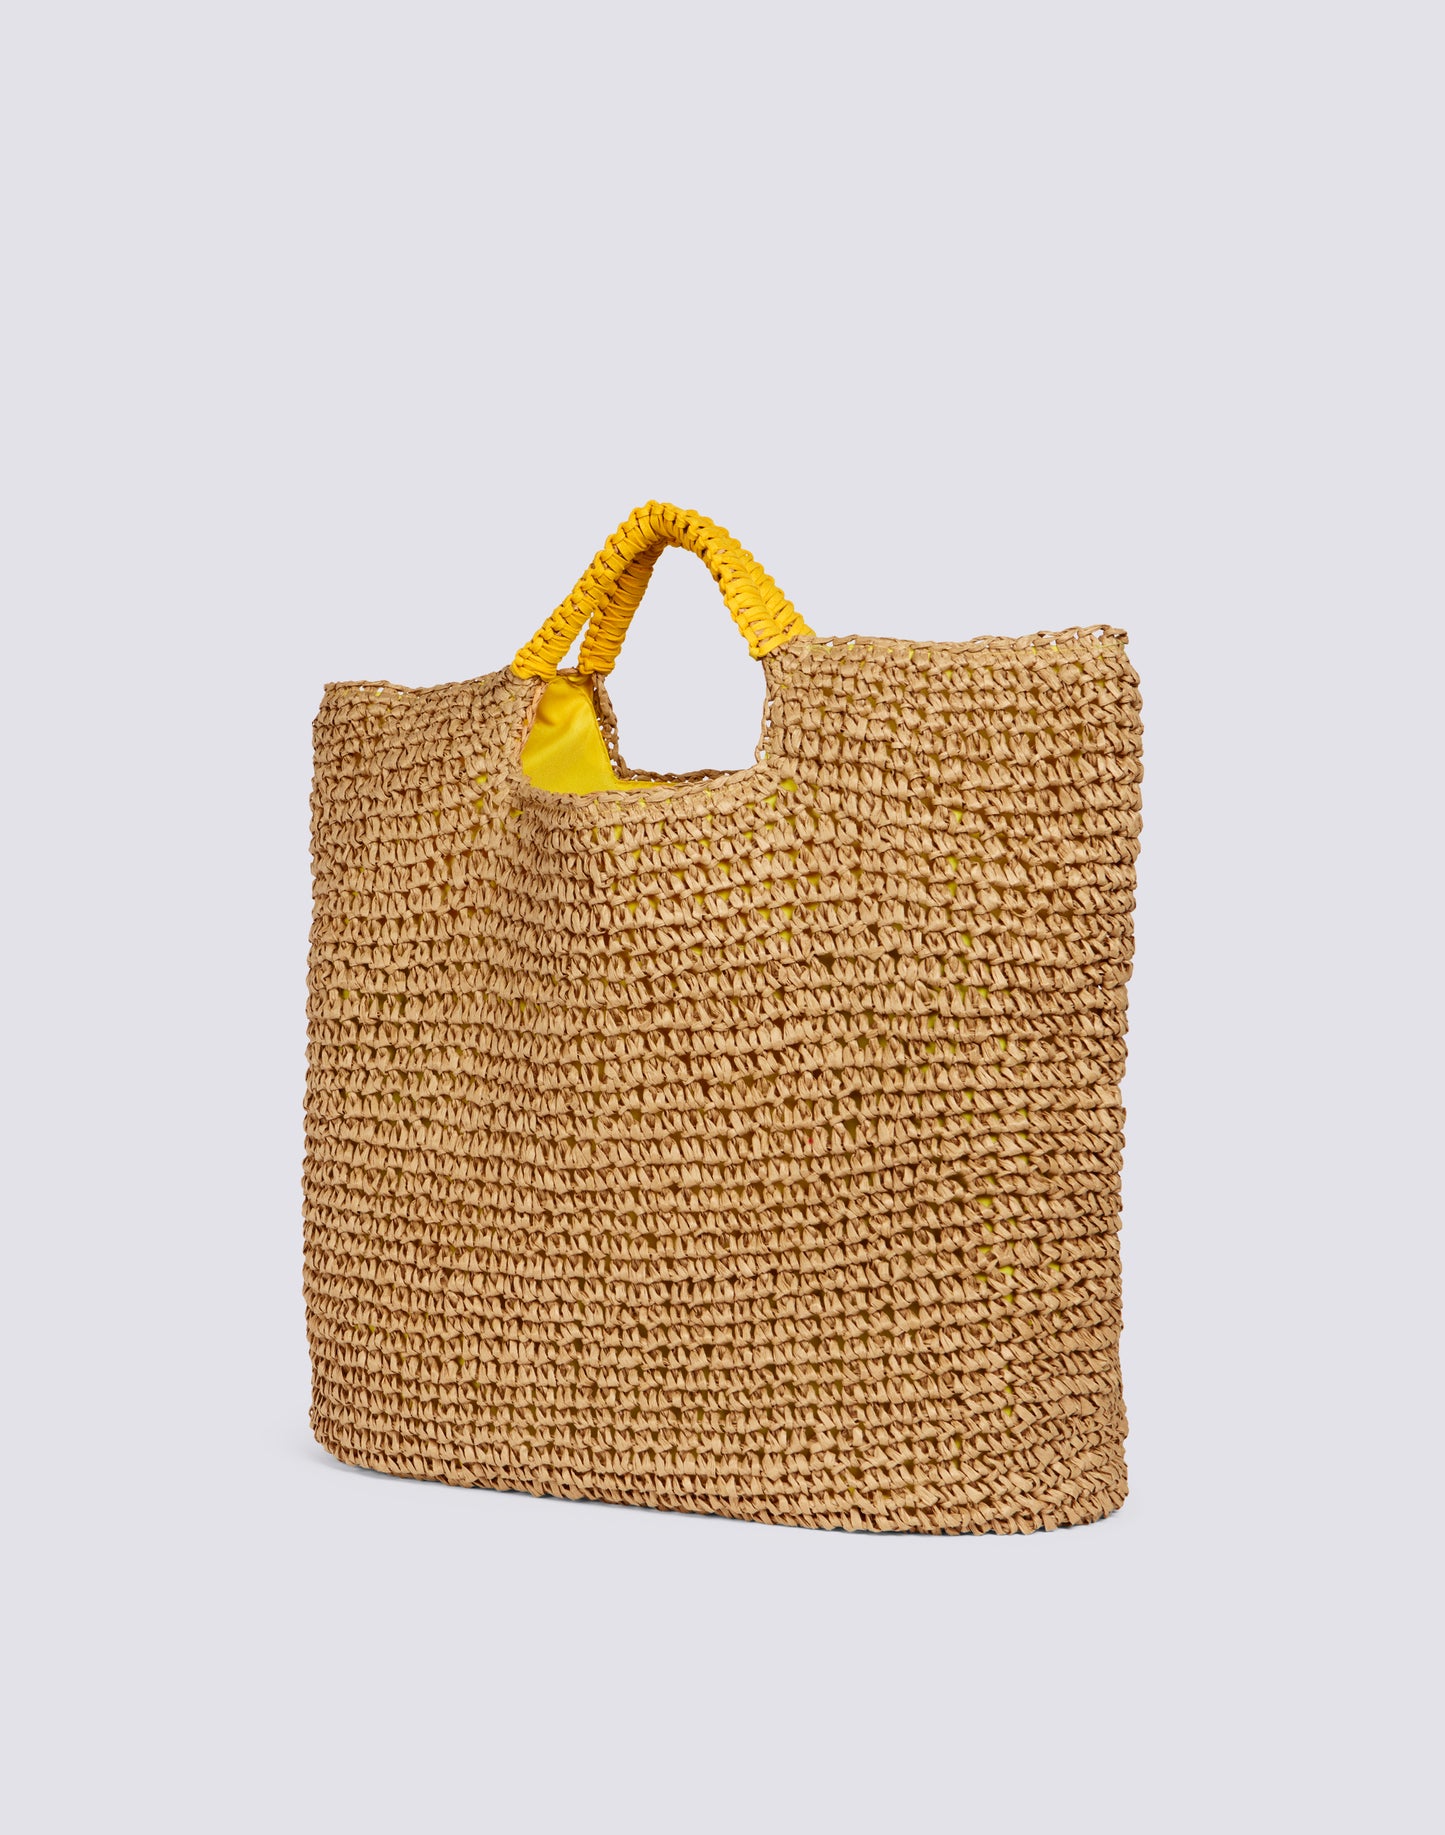 MAXI BAG IN WOVEN PAPER STRAW